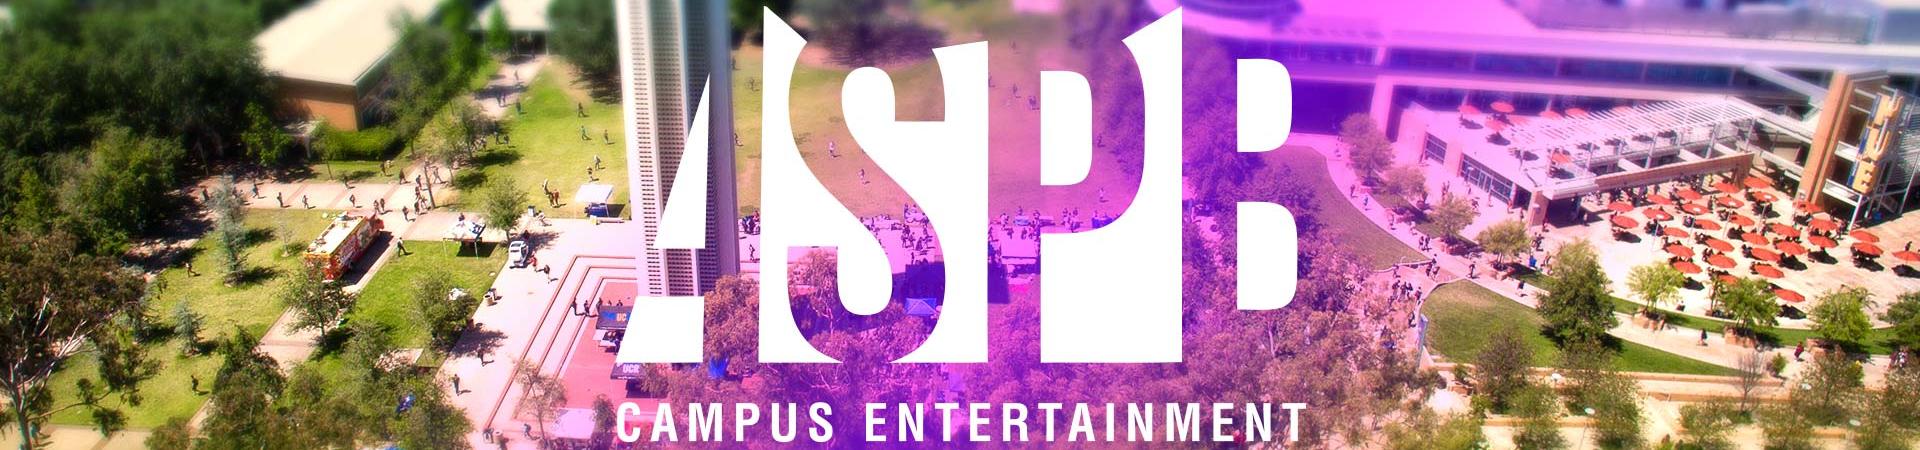 ASPB produces free events on the UCR campus.